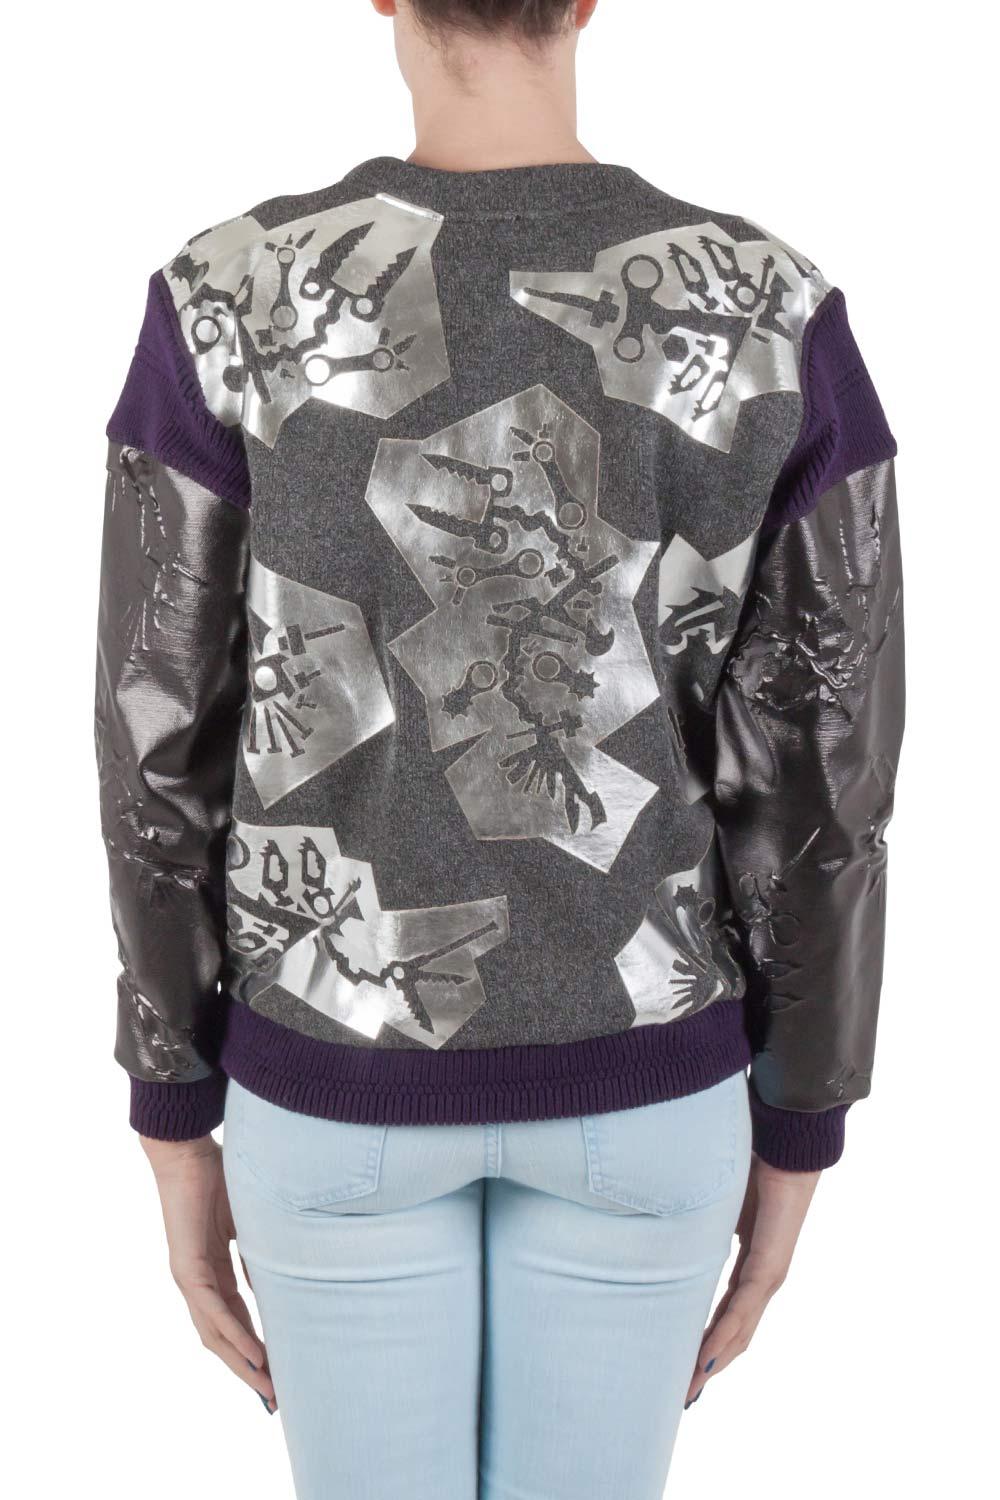 This multi fabric sweatshirt comes in grey color with eliciting monster foil print. The creation is by Kenzo and features a rib trim on sleeves, hem and shoulders. Team it with dark bottoms and boots.

Includes: The Luxury Closet Packaging, Original